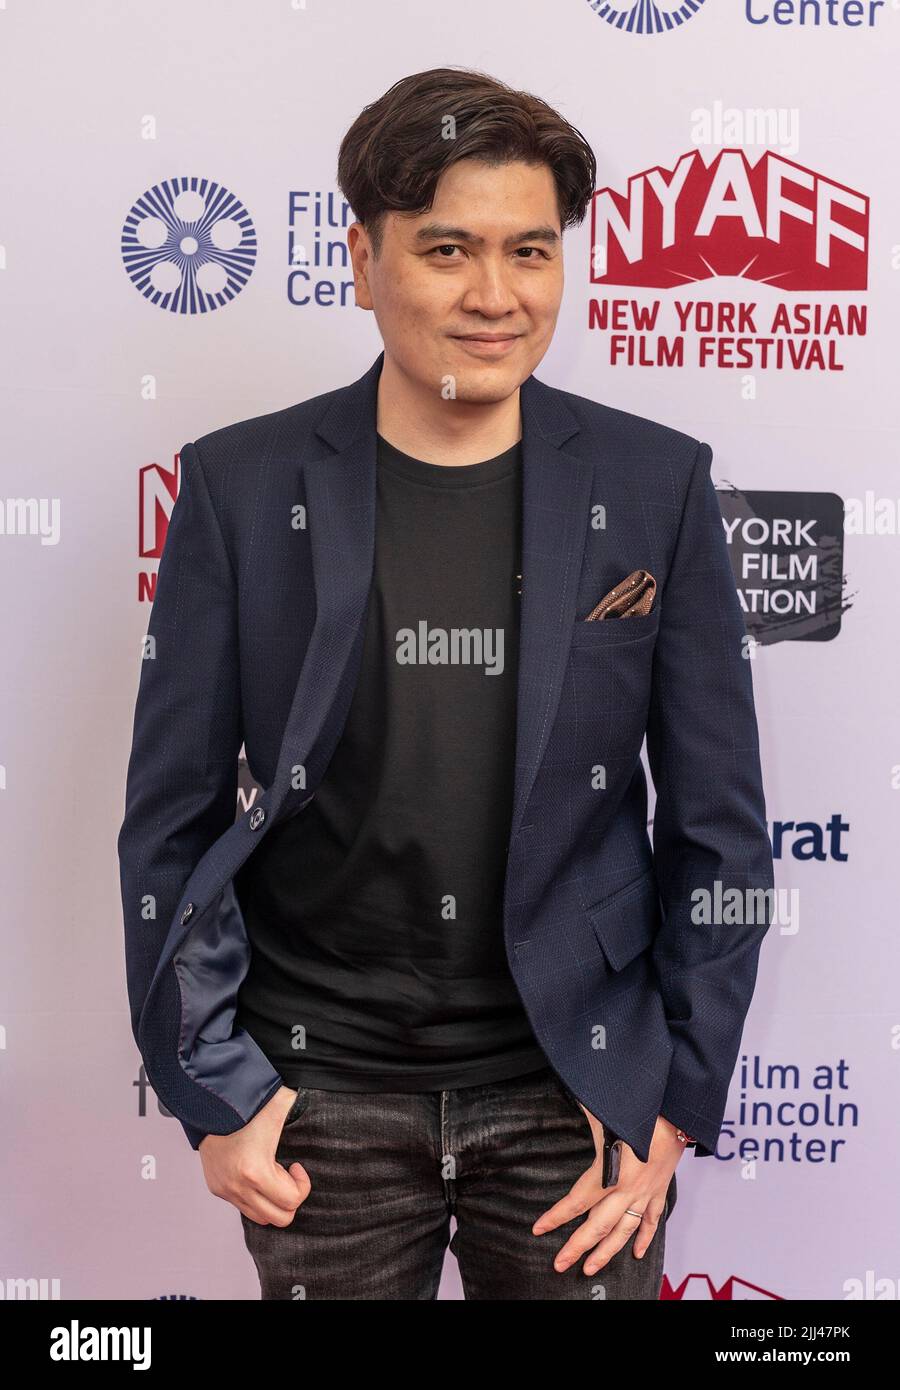 New York, USA. 22nd July, 2022. Director Sunny Chan attends 7th day of New York Asian Film Festival at Furman Gallery Film at Lincoln Center (Photo by Lev Radin/Pacific Press) Credit: Pacific Press Media Production Corp./Alamy Live News Stock Photo